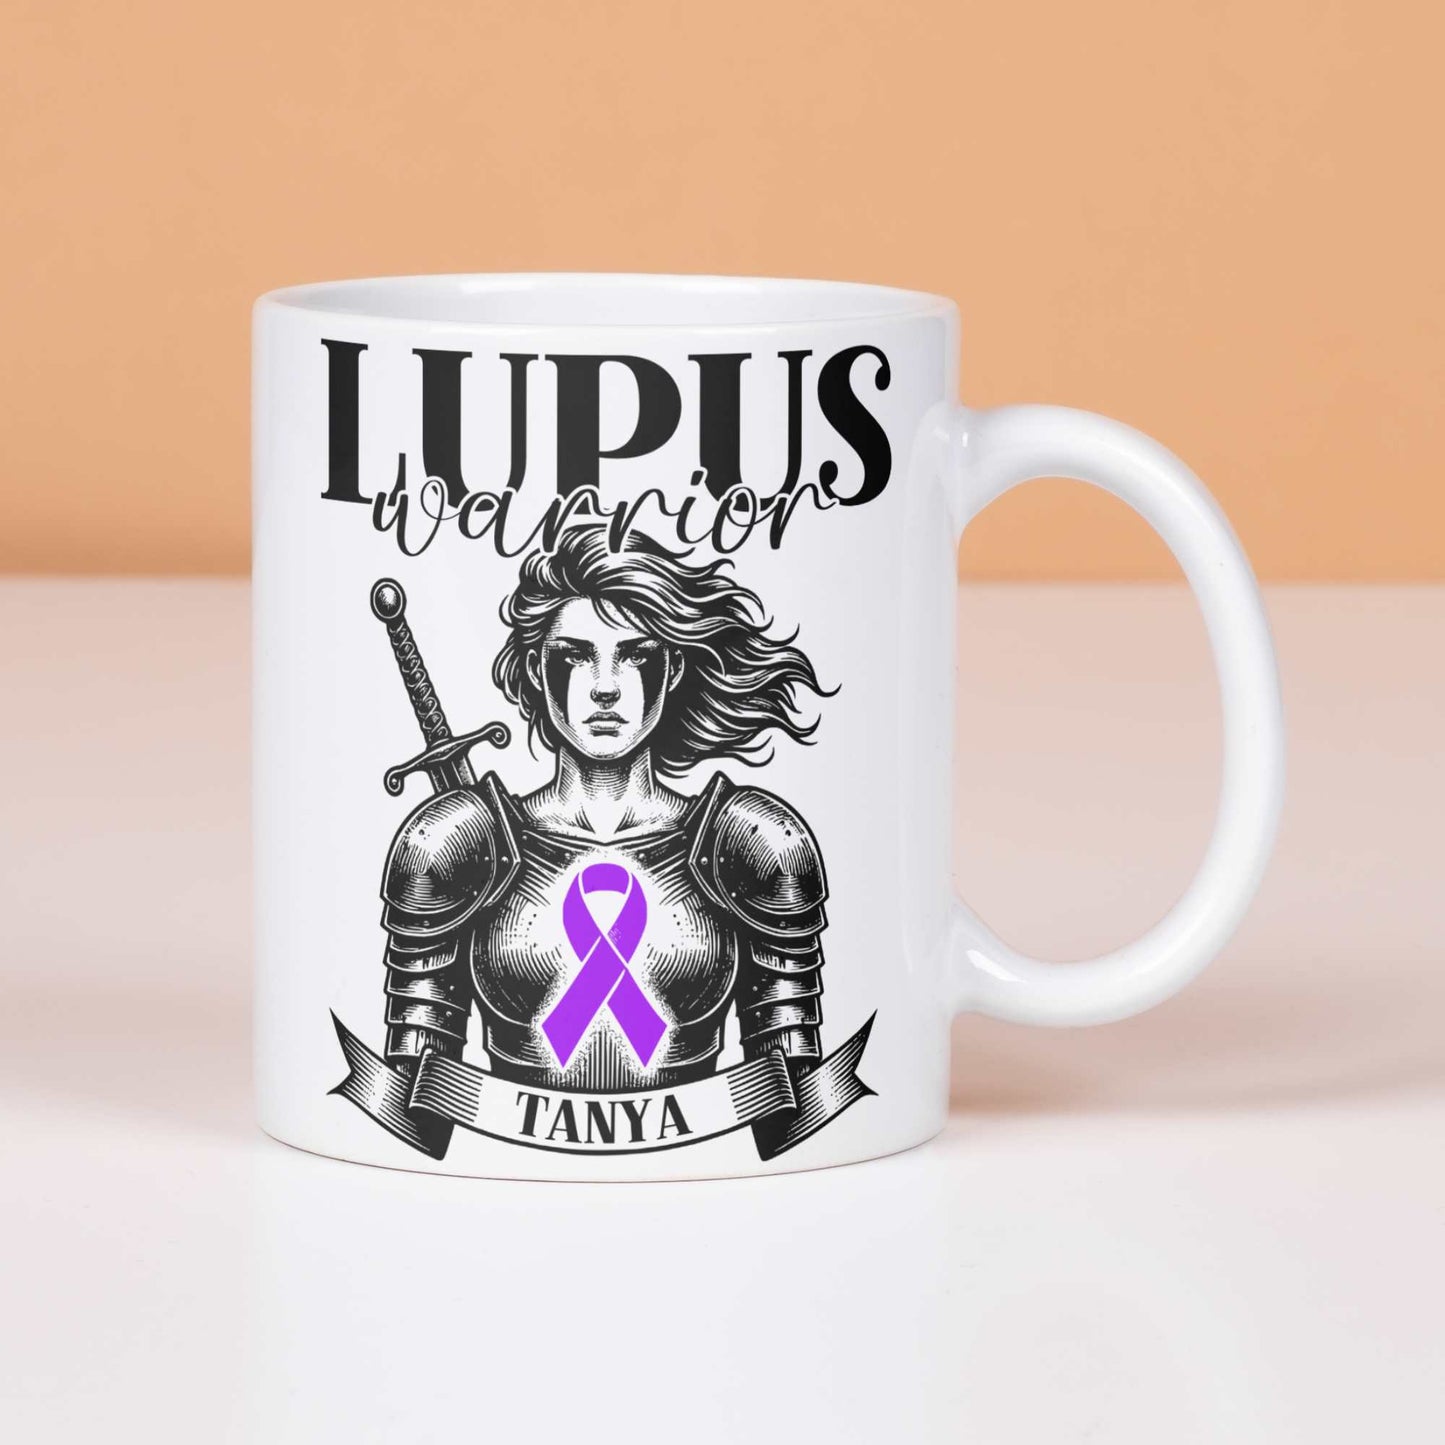 Lupus Warrior Personalised Mug - A Heartfelt Christmas, Mother's Day, Birthday Gift for Mum, Daughter, Sister, Nan, Auntie & Friends, Celebrating Strength and Awareness